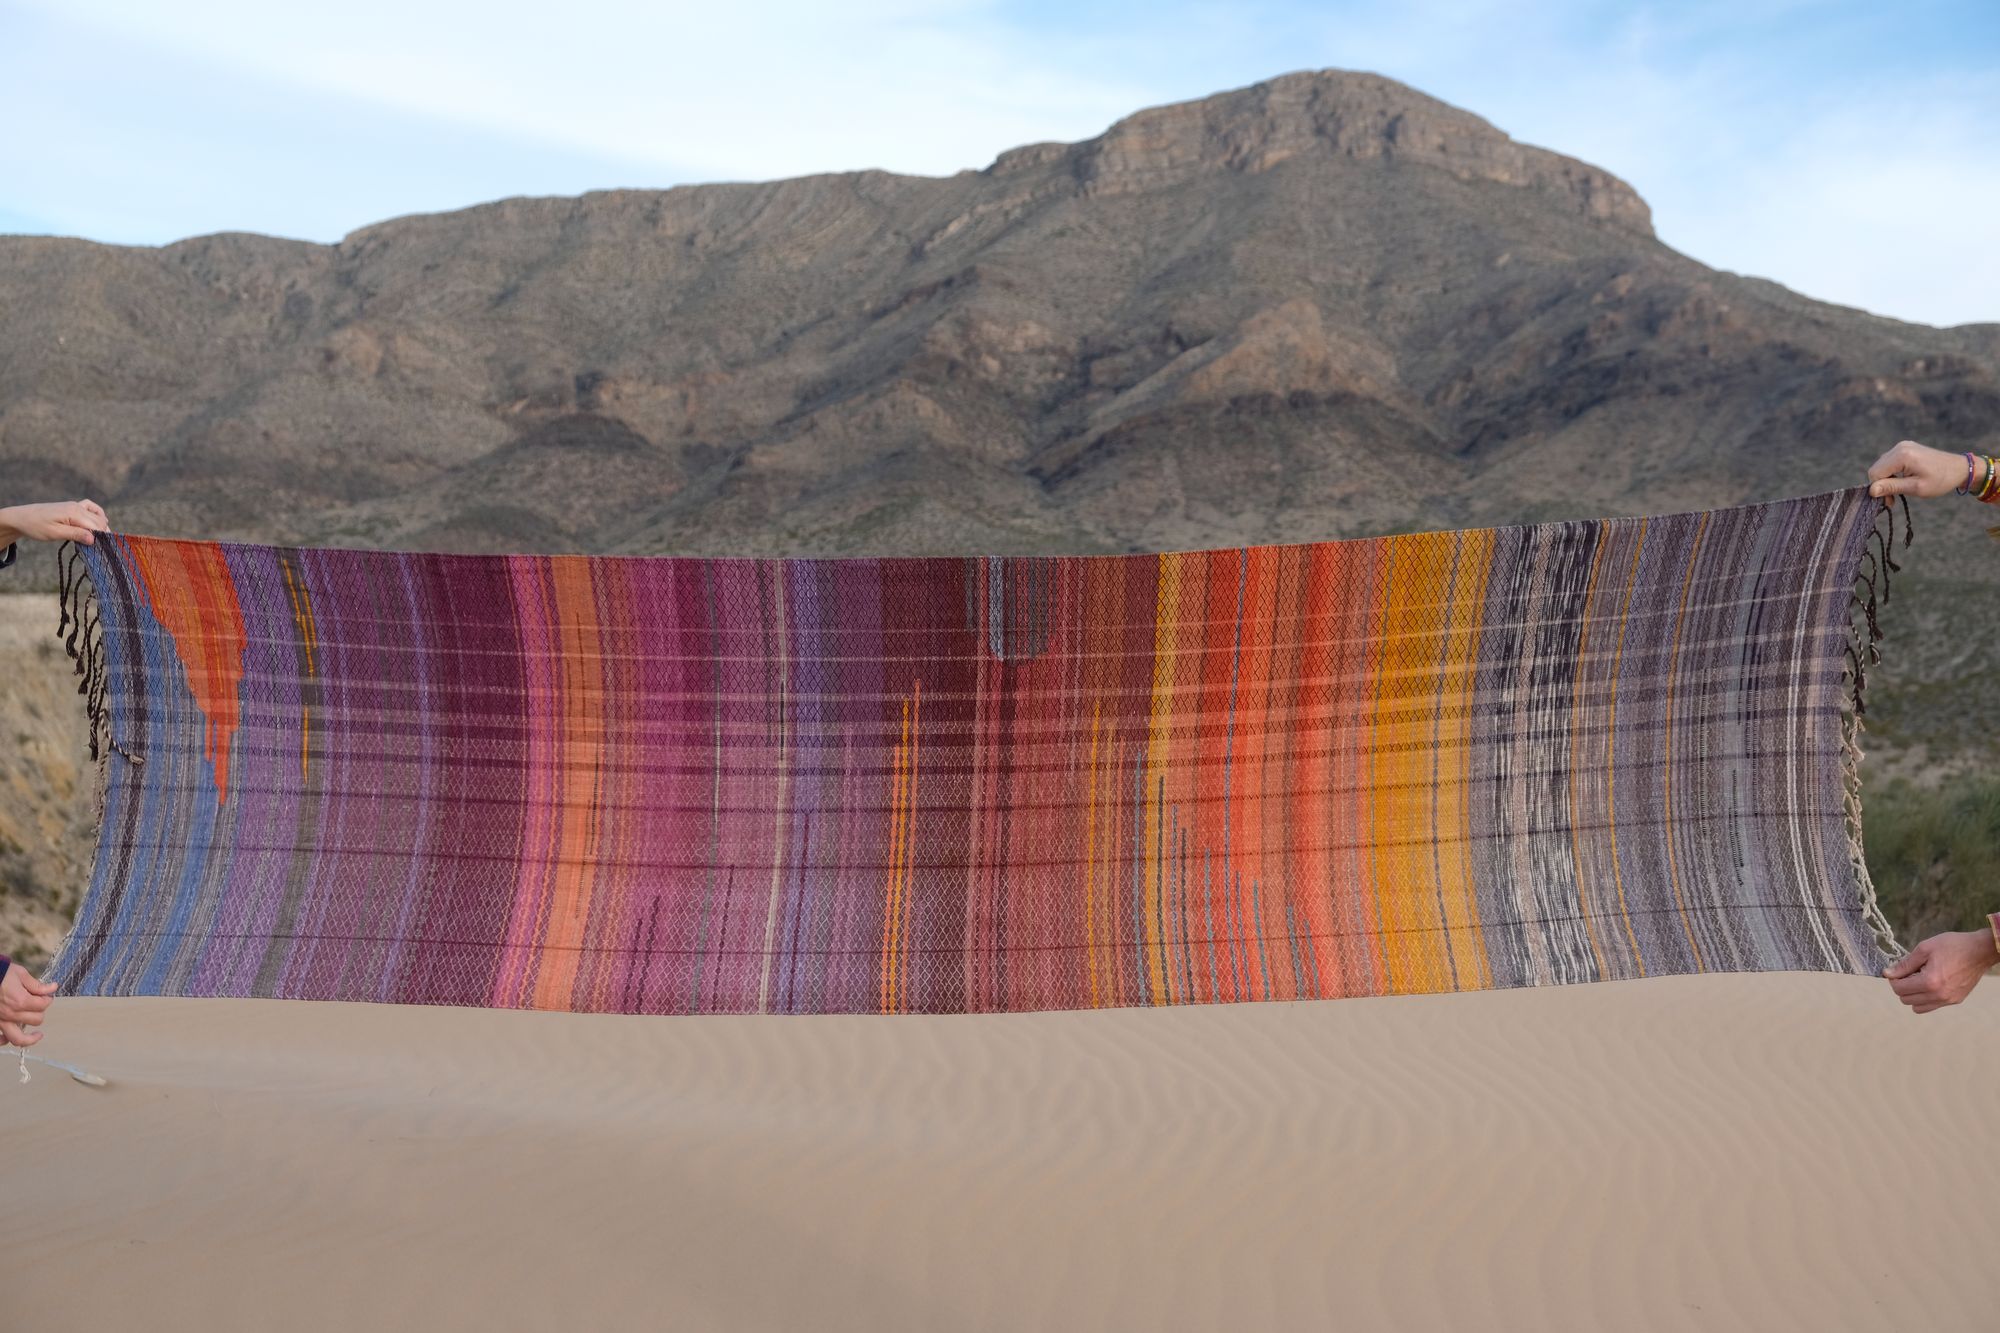 a handwoven brightly colored orange, yellow, purple, grey, blue shawl is held out by hands in front of a sand dune, desert mountain landscape